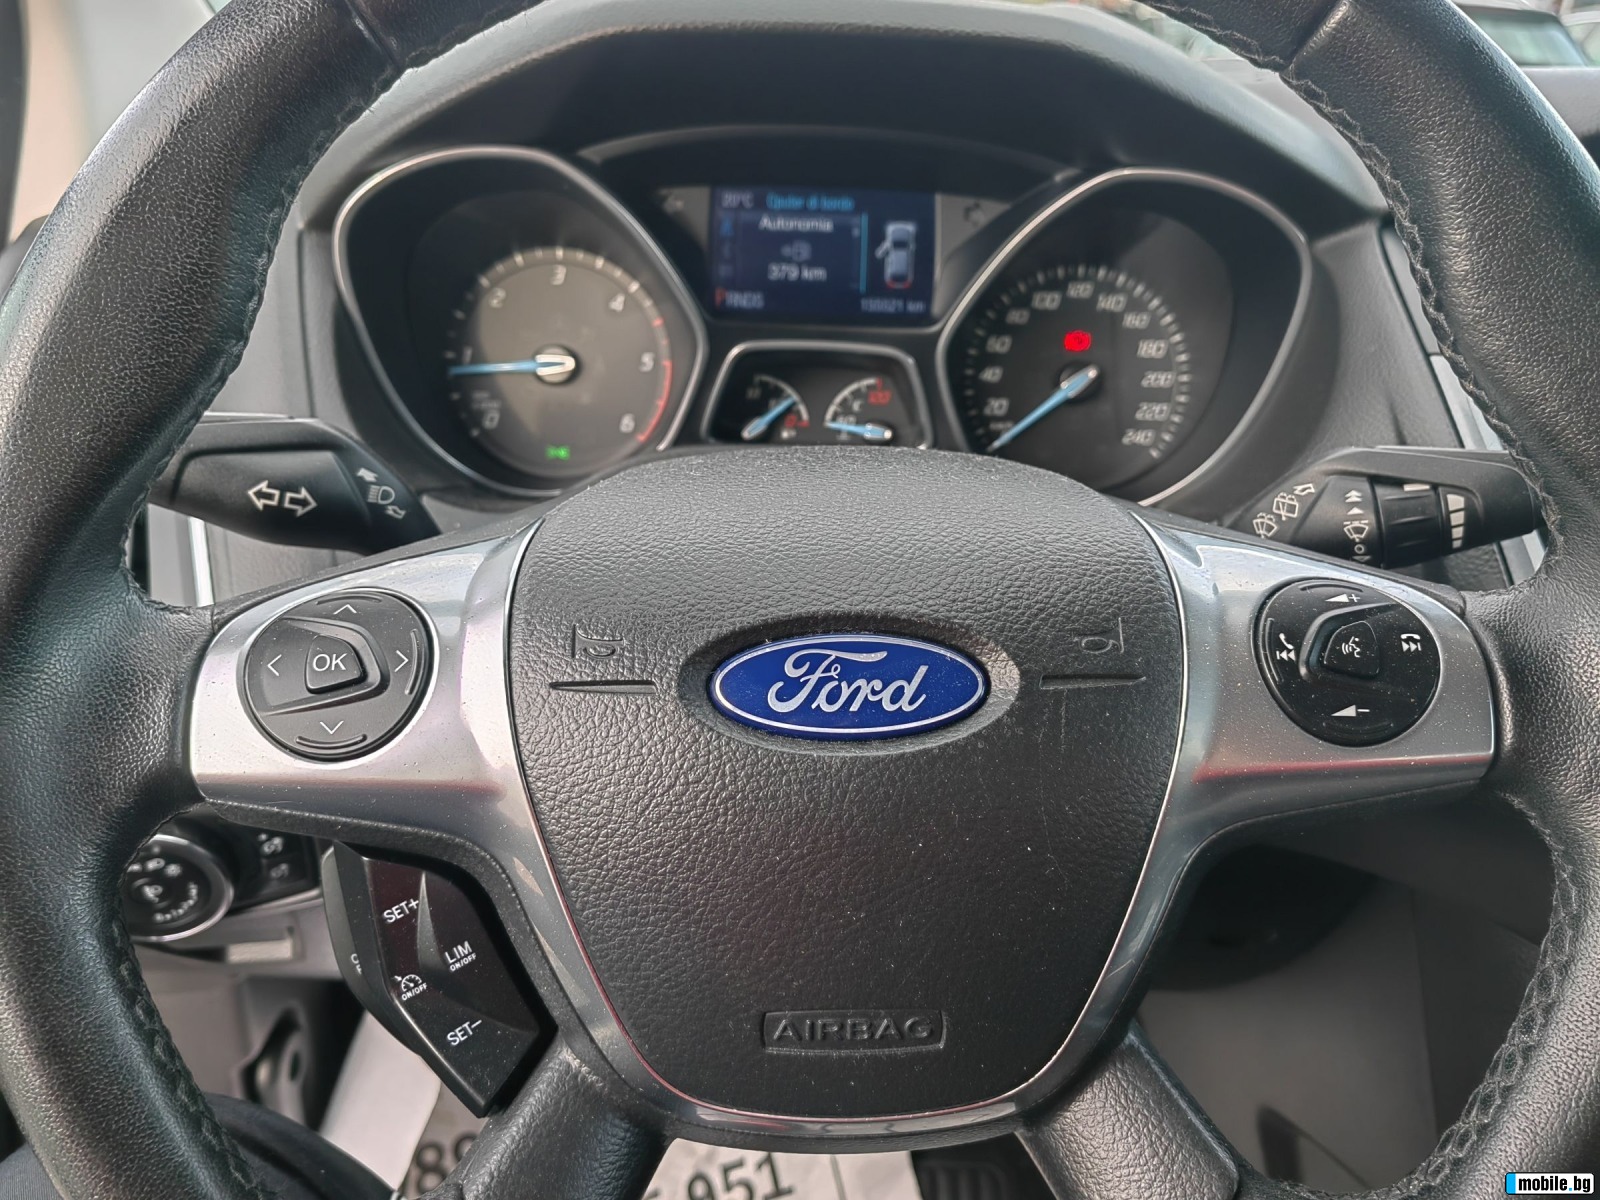 Ford Focus 2.0 TDCI Automatic | Mobile.bg   12